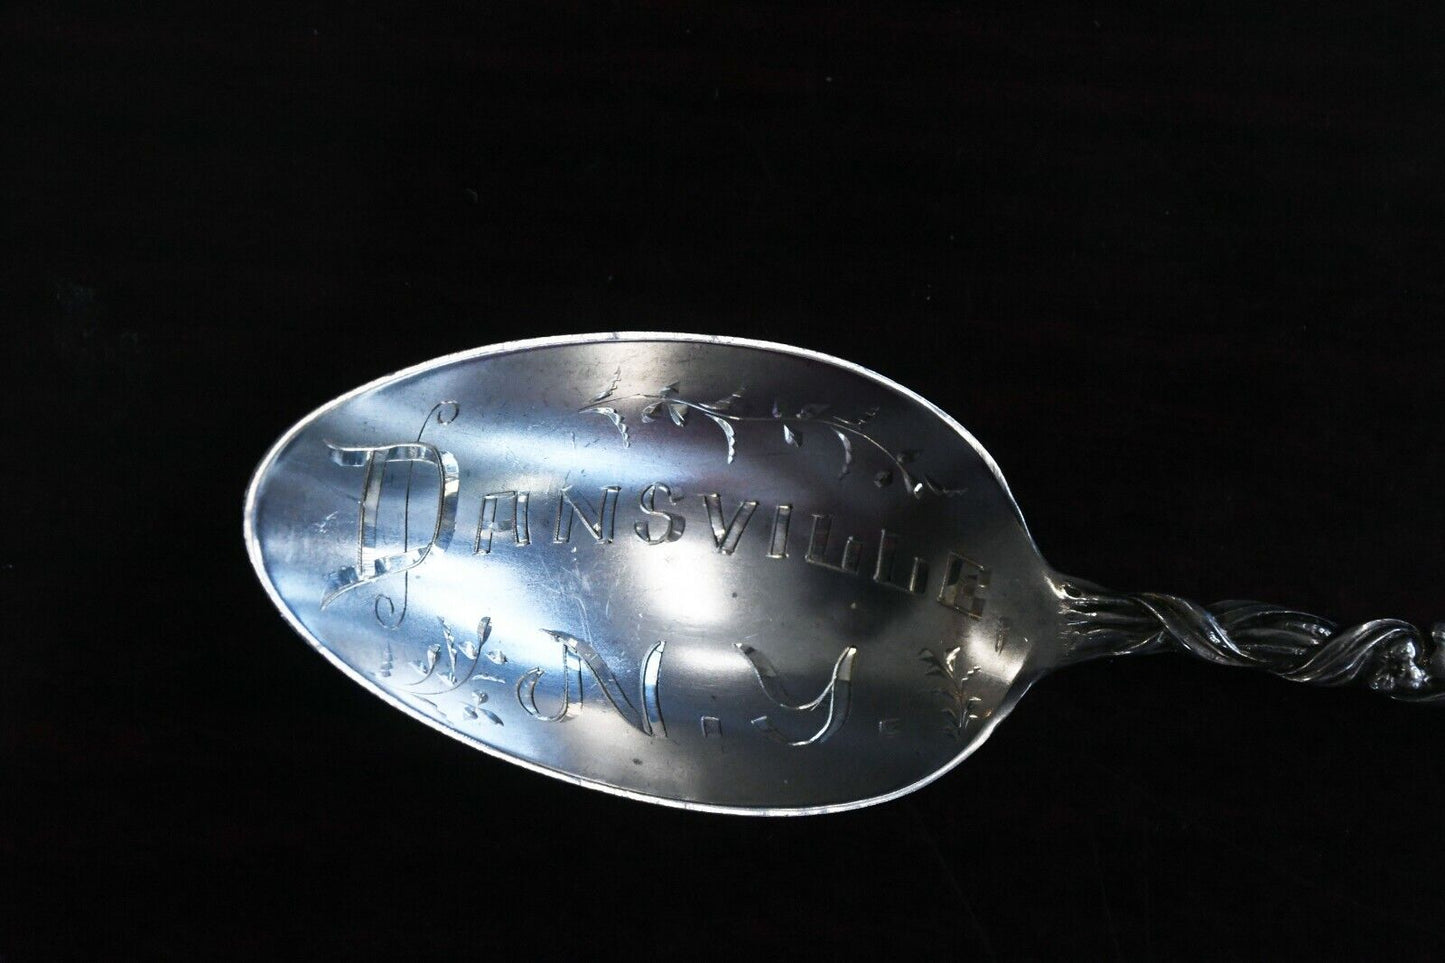 Dansville New York Sterling Silver Souvenir Spoon from Shepard Old Orchard